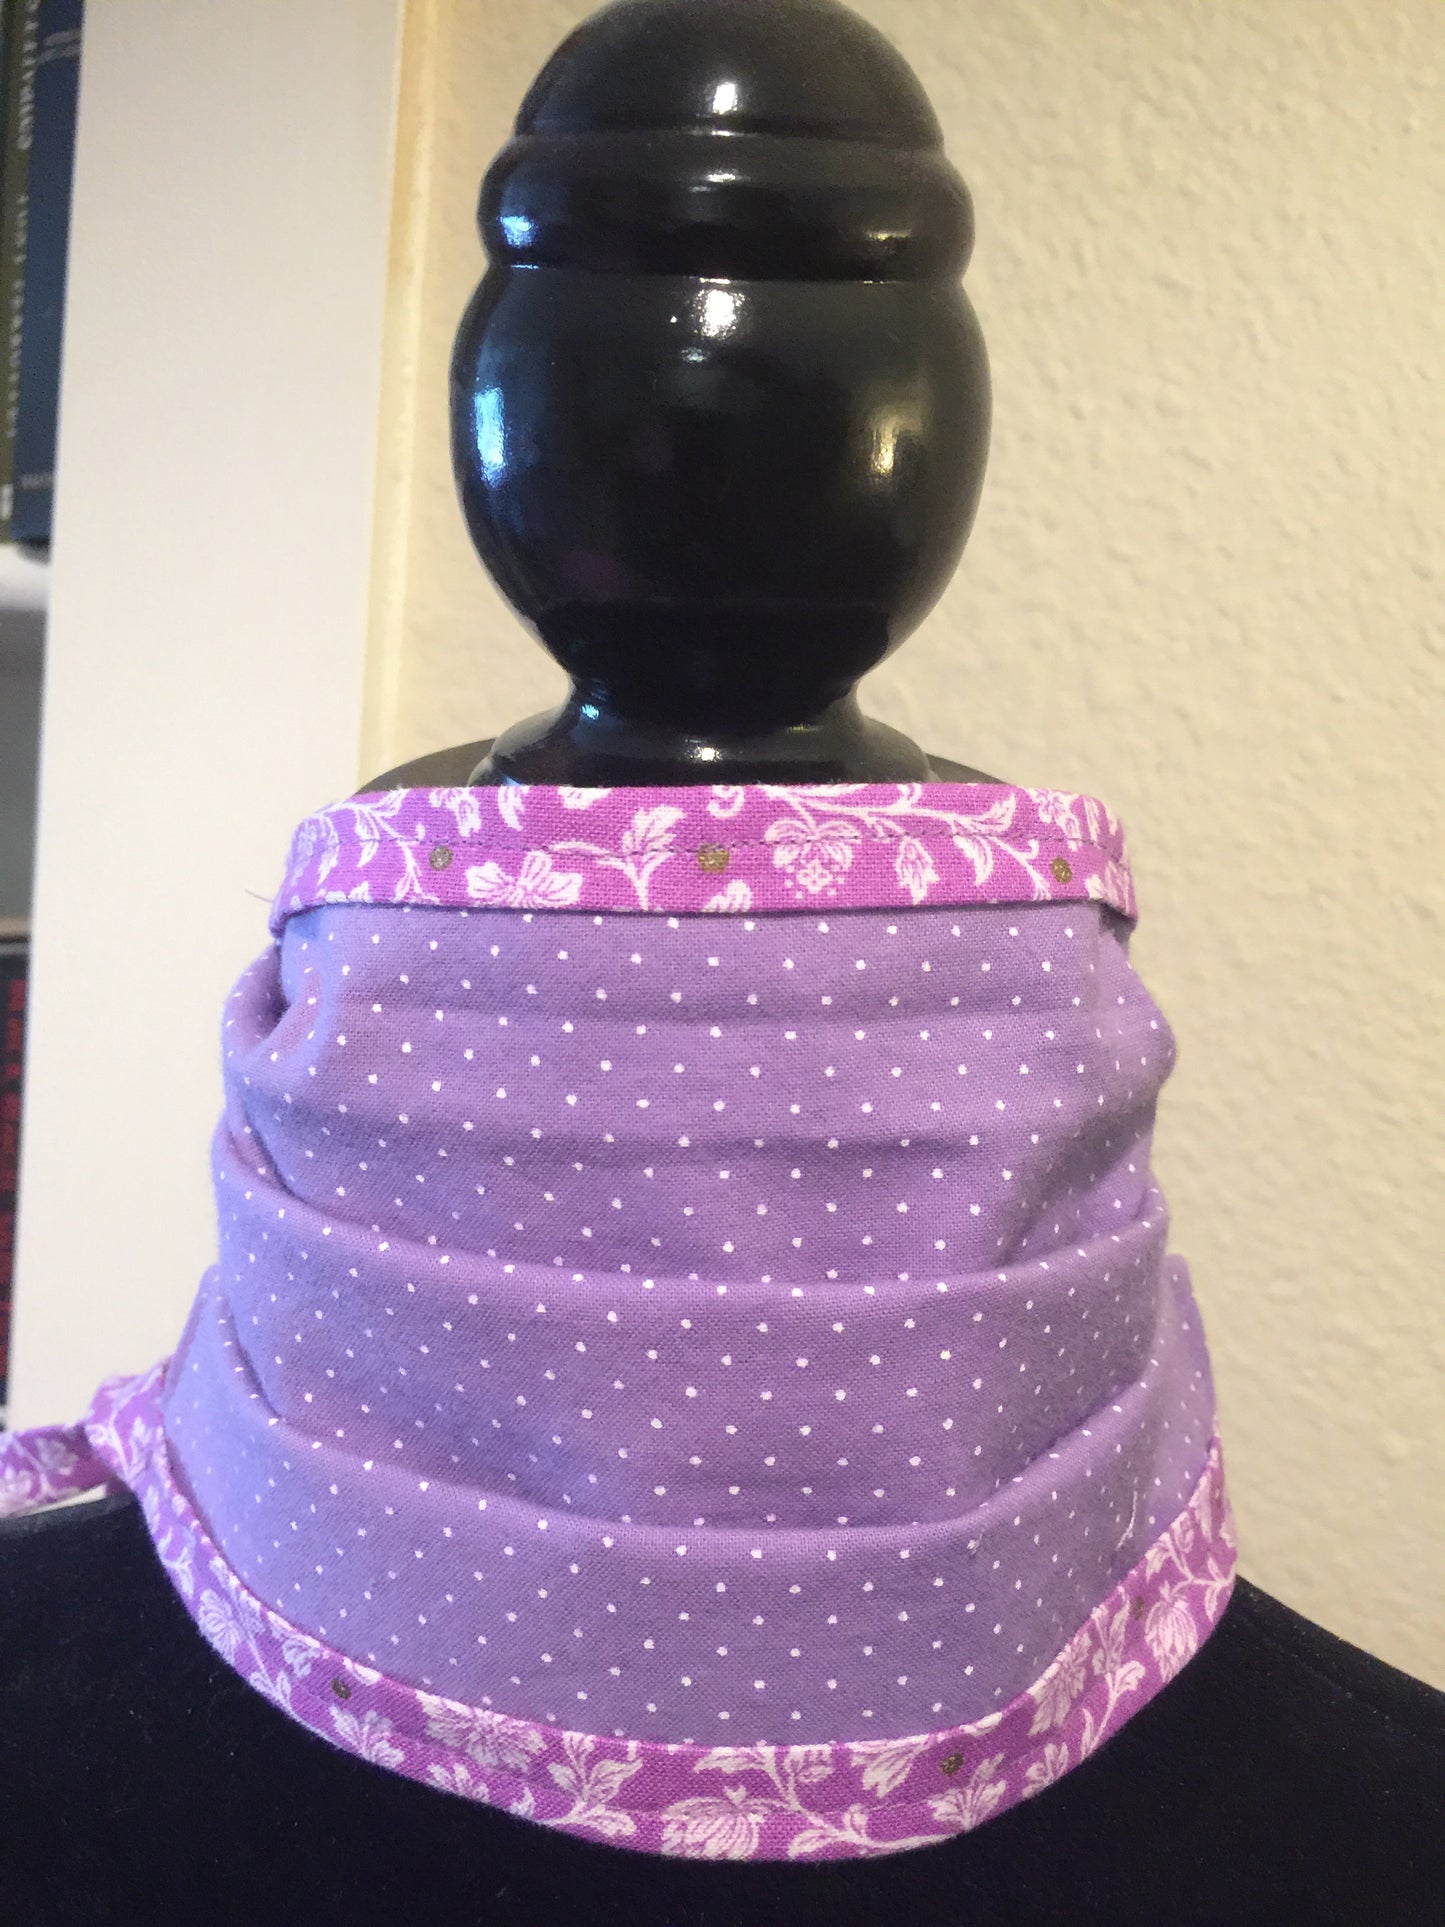 Handmade Fabric Mask Without Filter Pocket